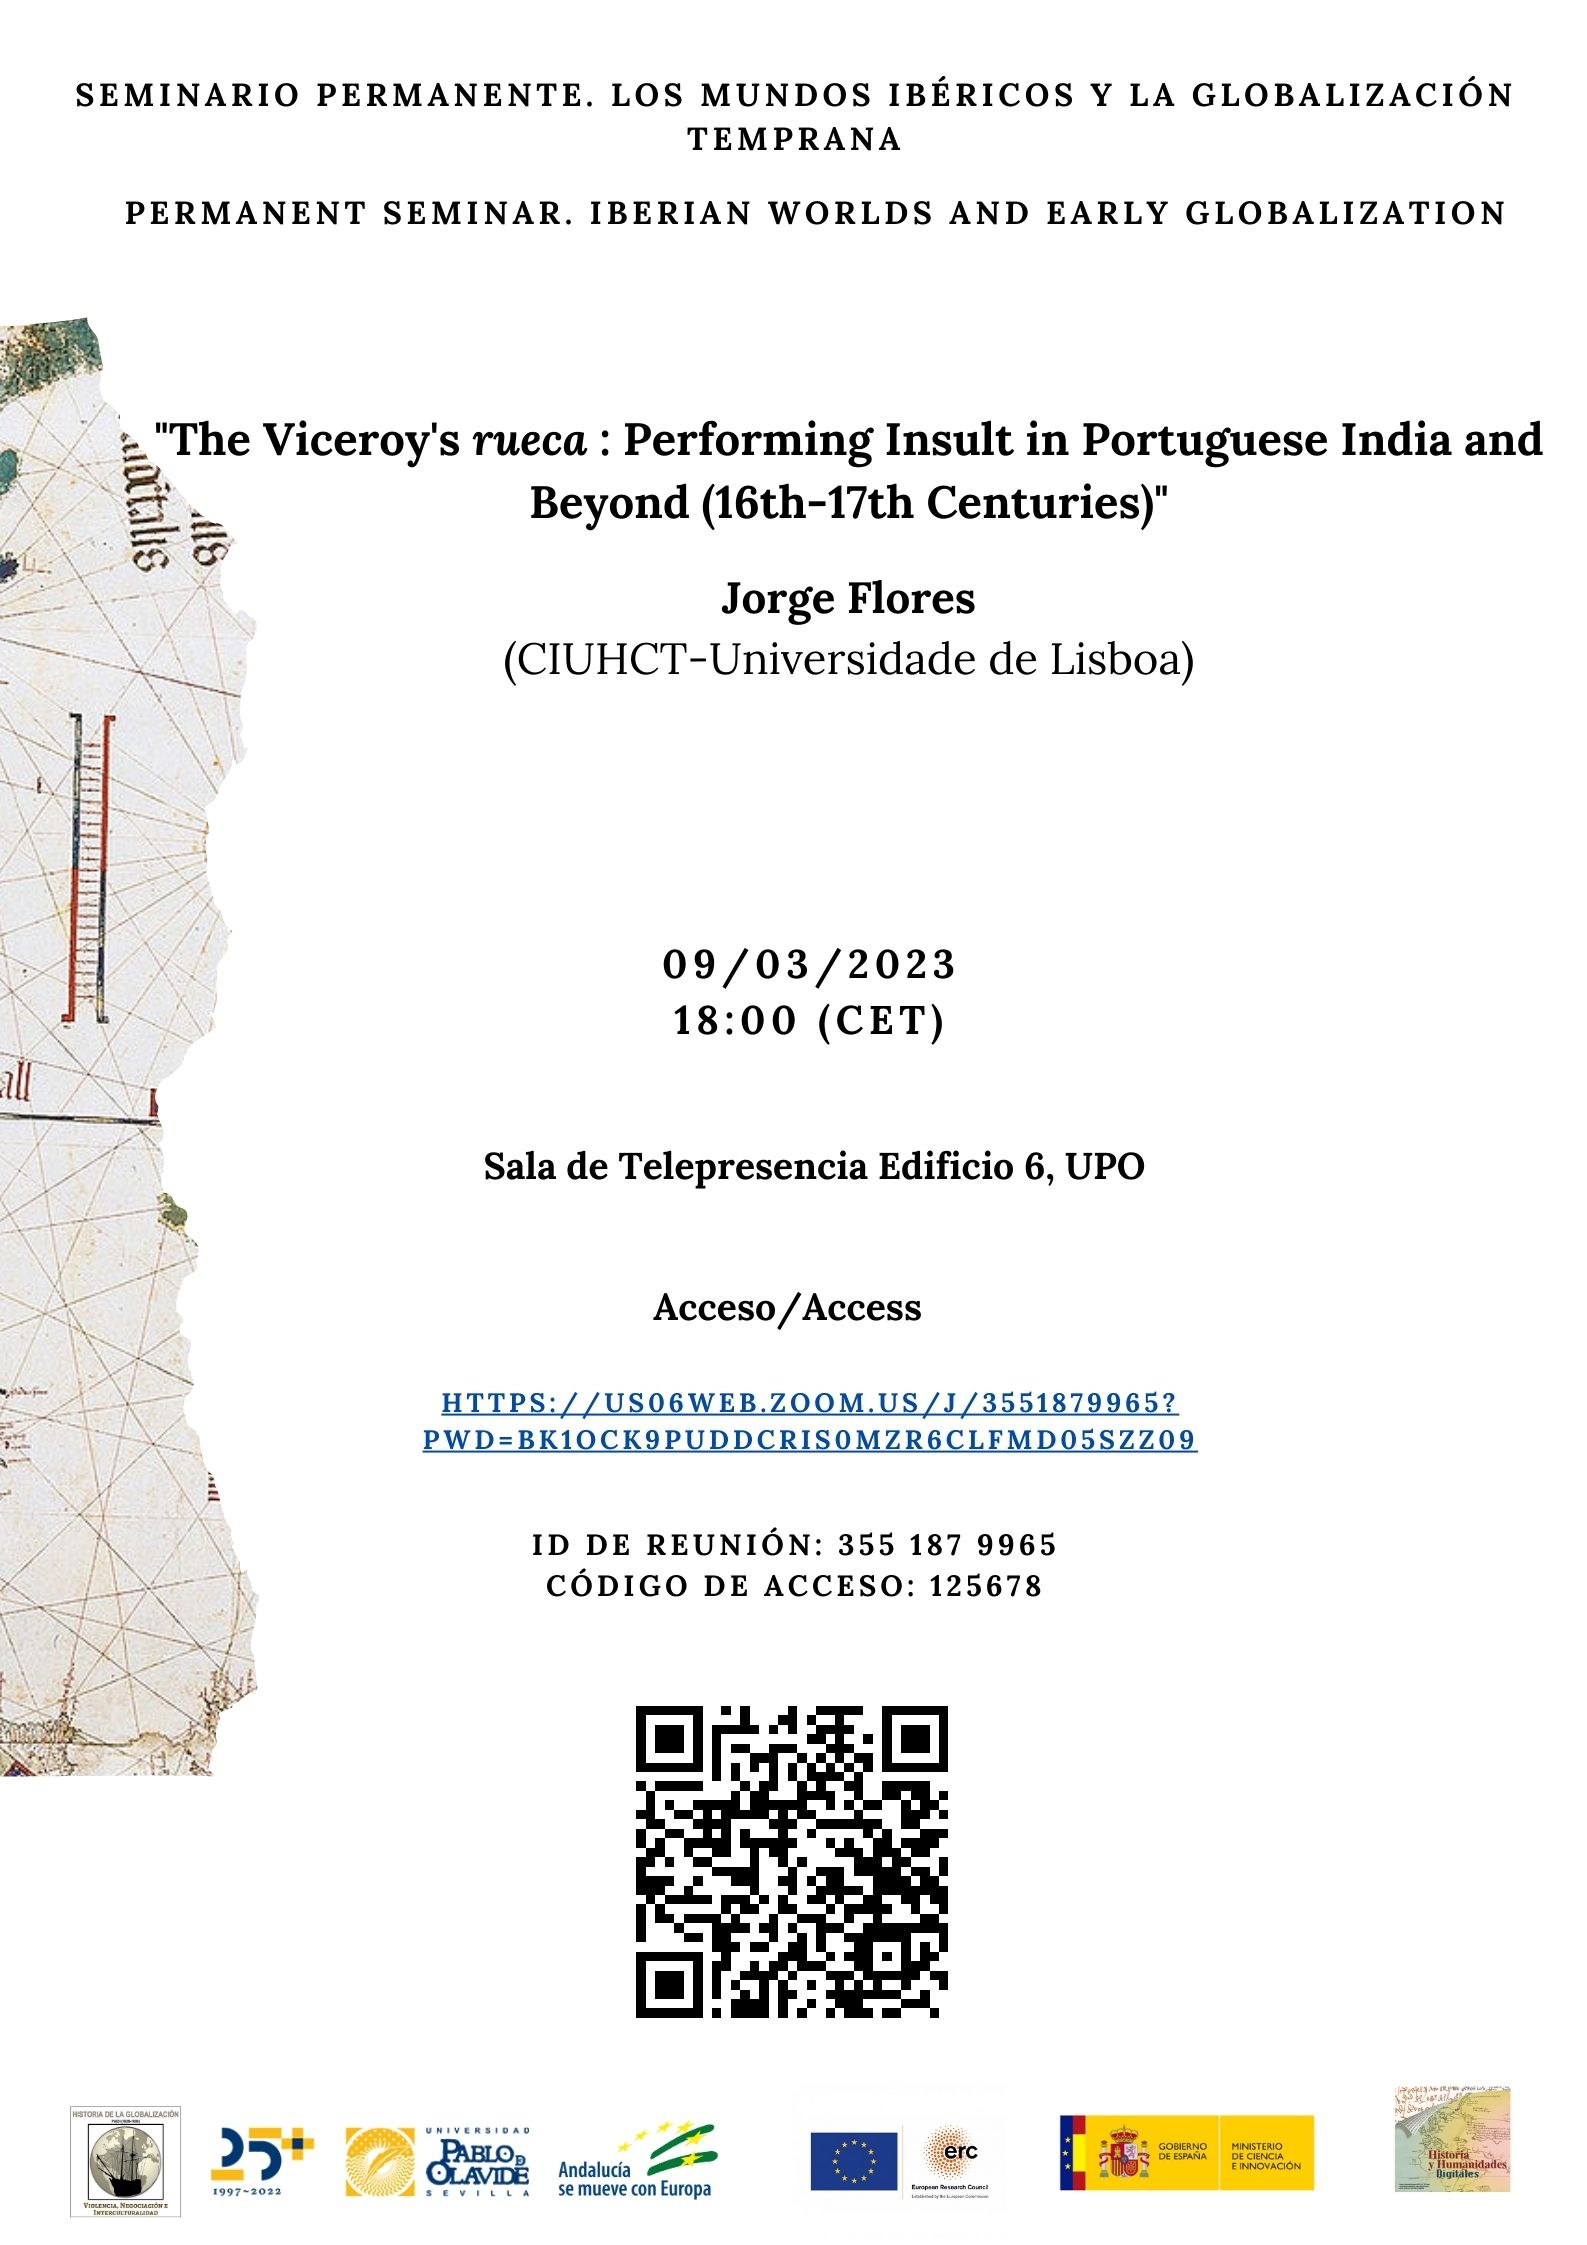 he Viceroy’s rueca : Performing Insult in Portuguese India and Beyond (16th-17th Centuries)» el 9 de marzo a las 18:00 horas 